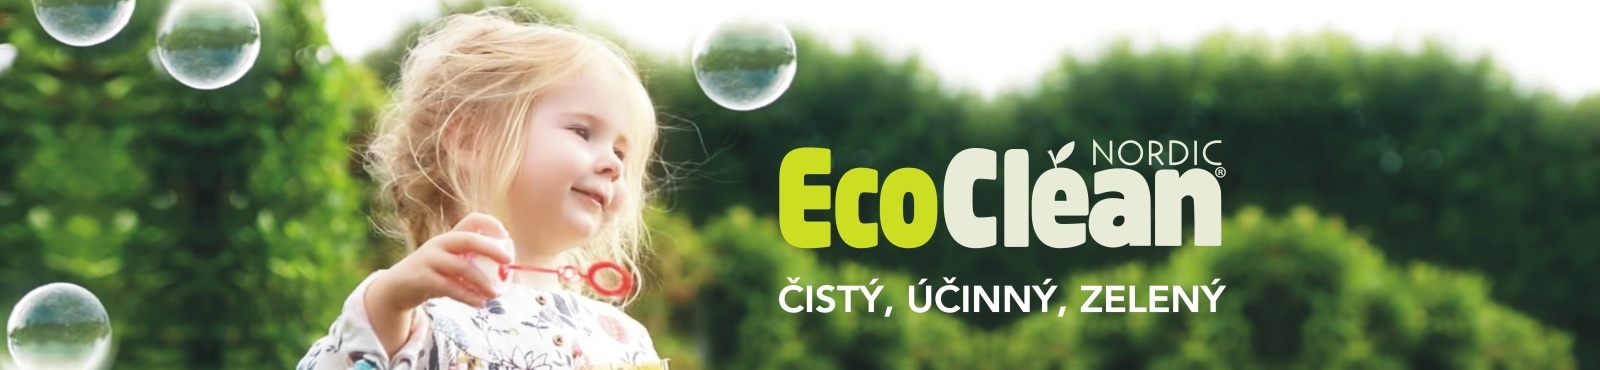 banner_ecoclean_new